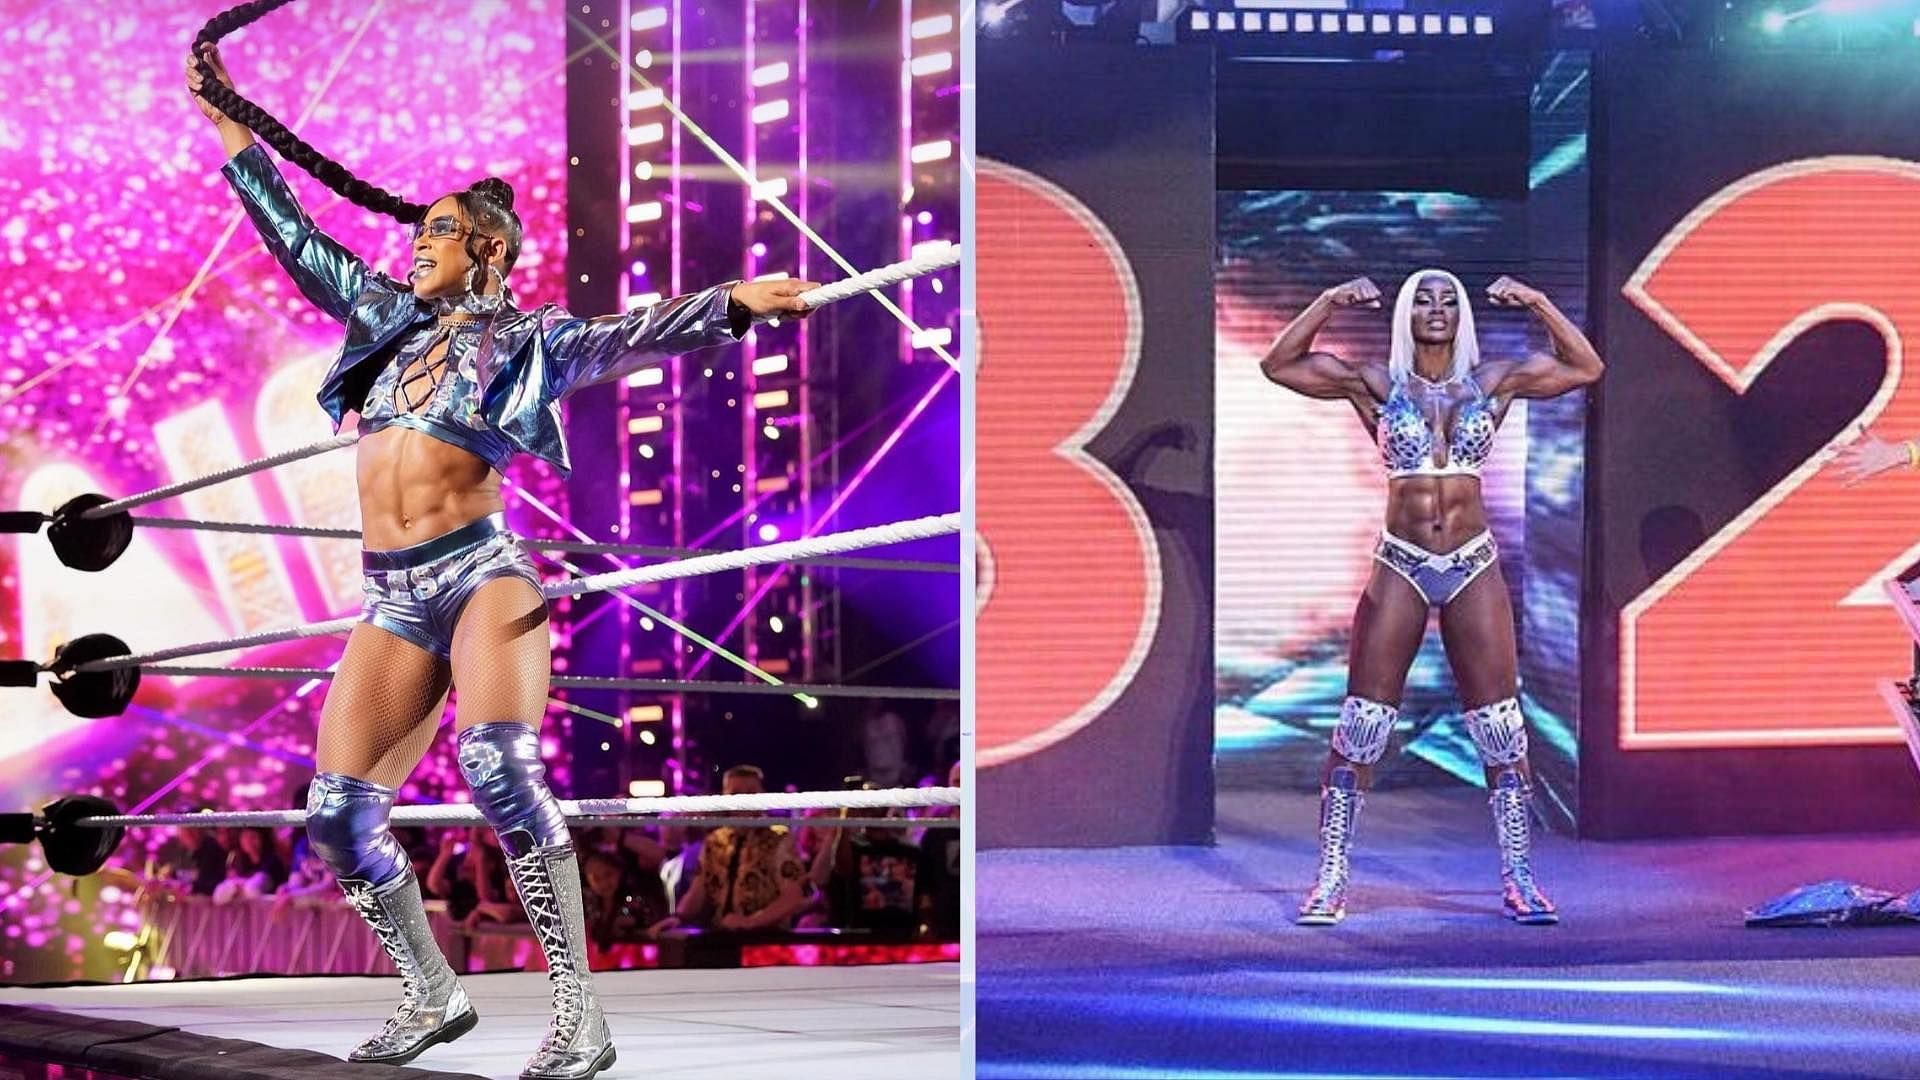 Bianca Belair and Jade Cargill should chase after the WWE Women